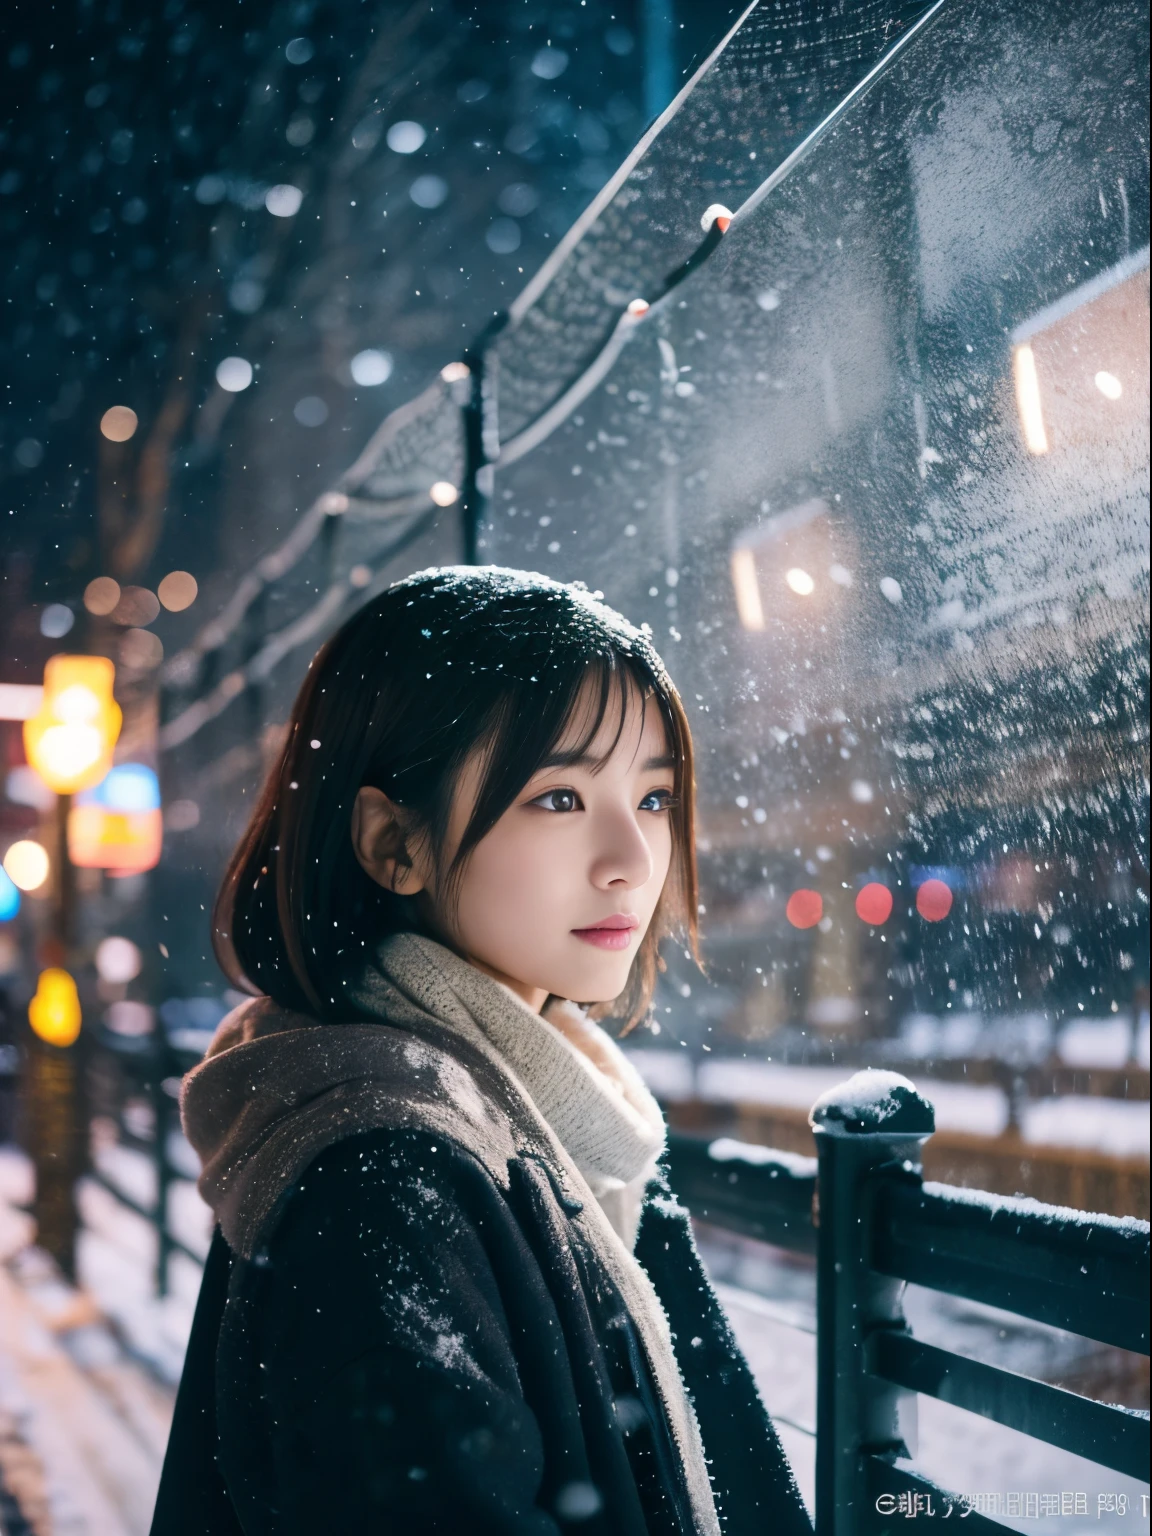 While watching the snow falling quietly. Her introspective and tearful expression、Makes you feel longing for winter nights and melancholy。。。、top-quality、hyper HD、Yoshitomo Nara, Japanese Models, Beautiful Japan wife, With short hair, 27-year-old female model, 4 K ], 4K], 27yo, sakimichan, sakimichan